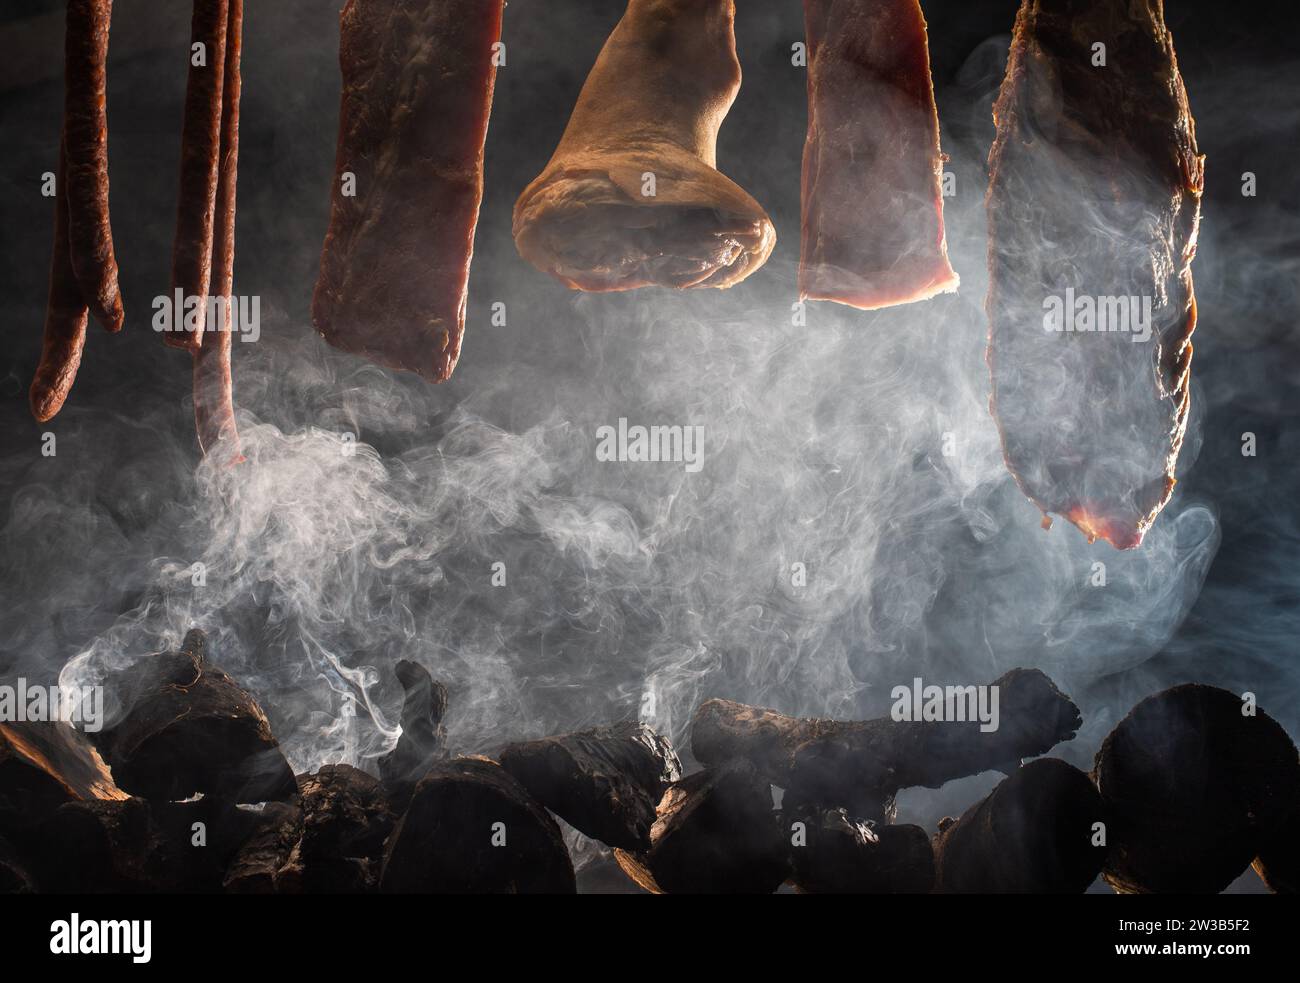 Drying pork meat in smokehouse,ribs,steak, knuckle,  dried sausage, Stock Photo